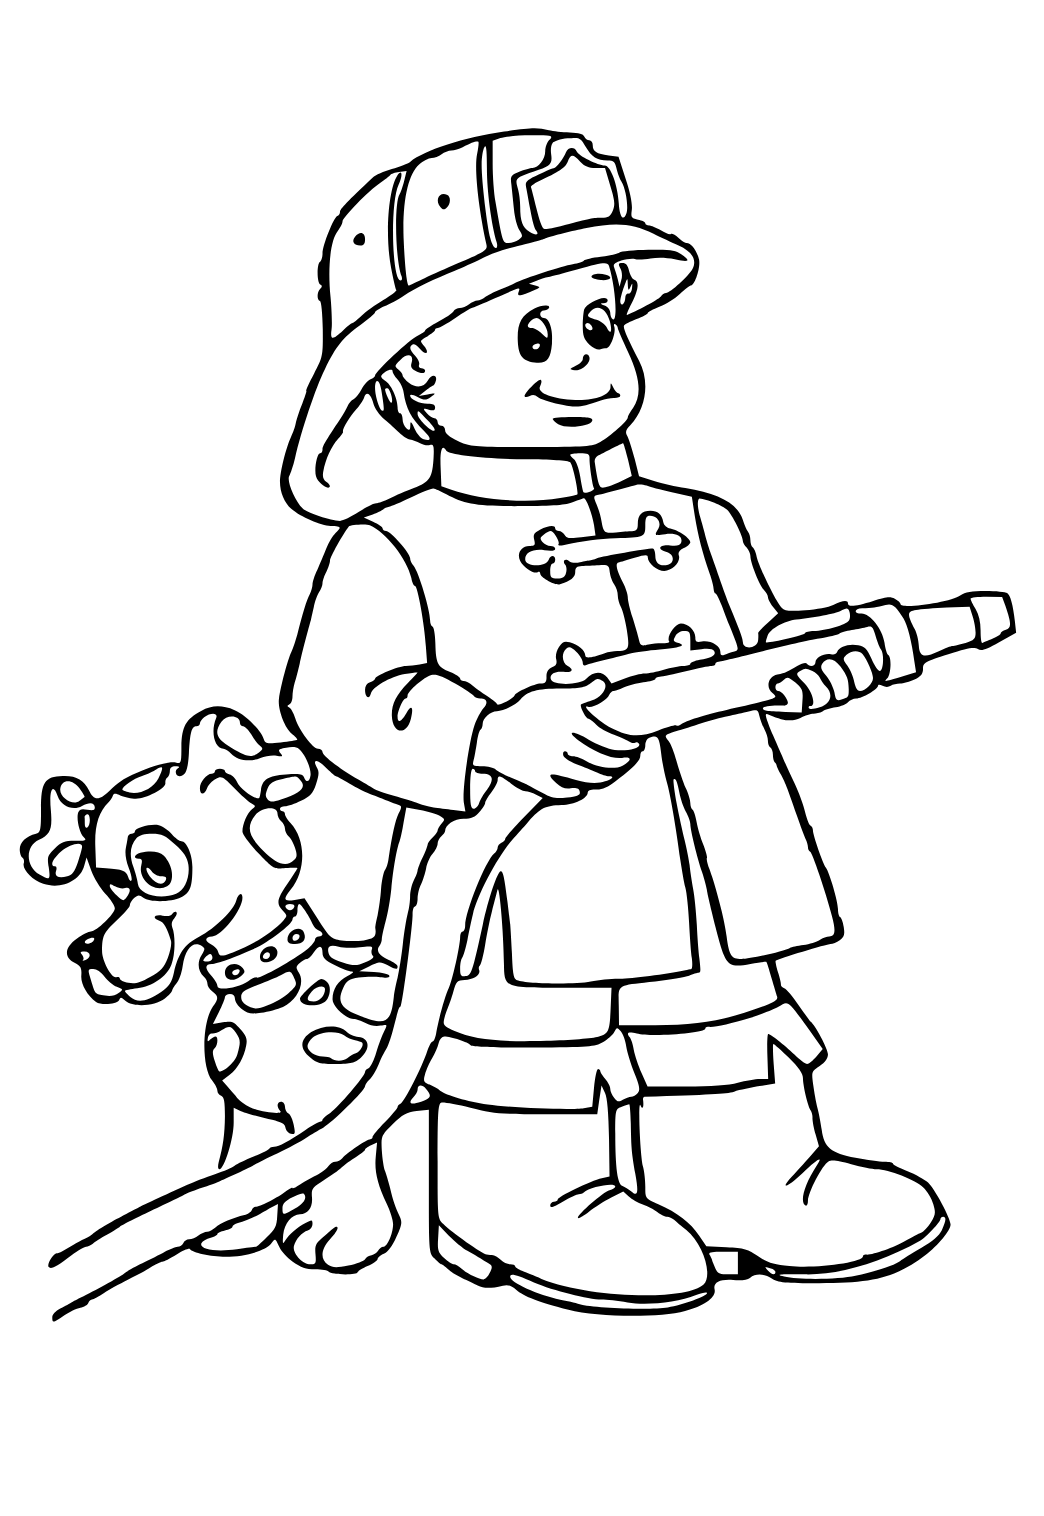 Free printable firefighter cute coloring page for adults and kids